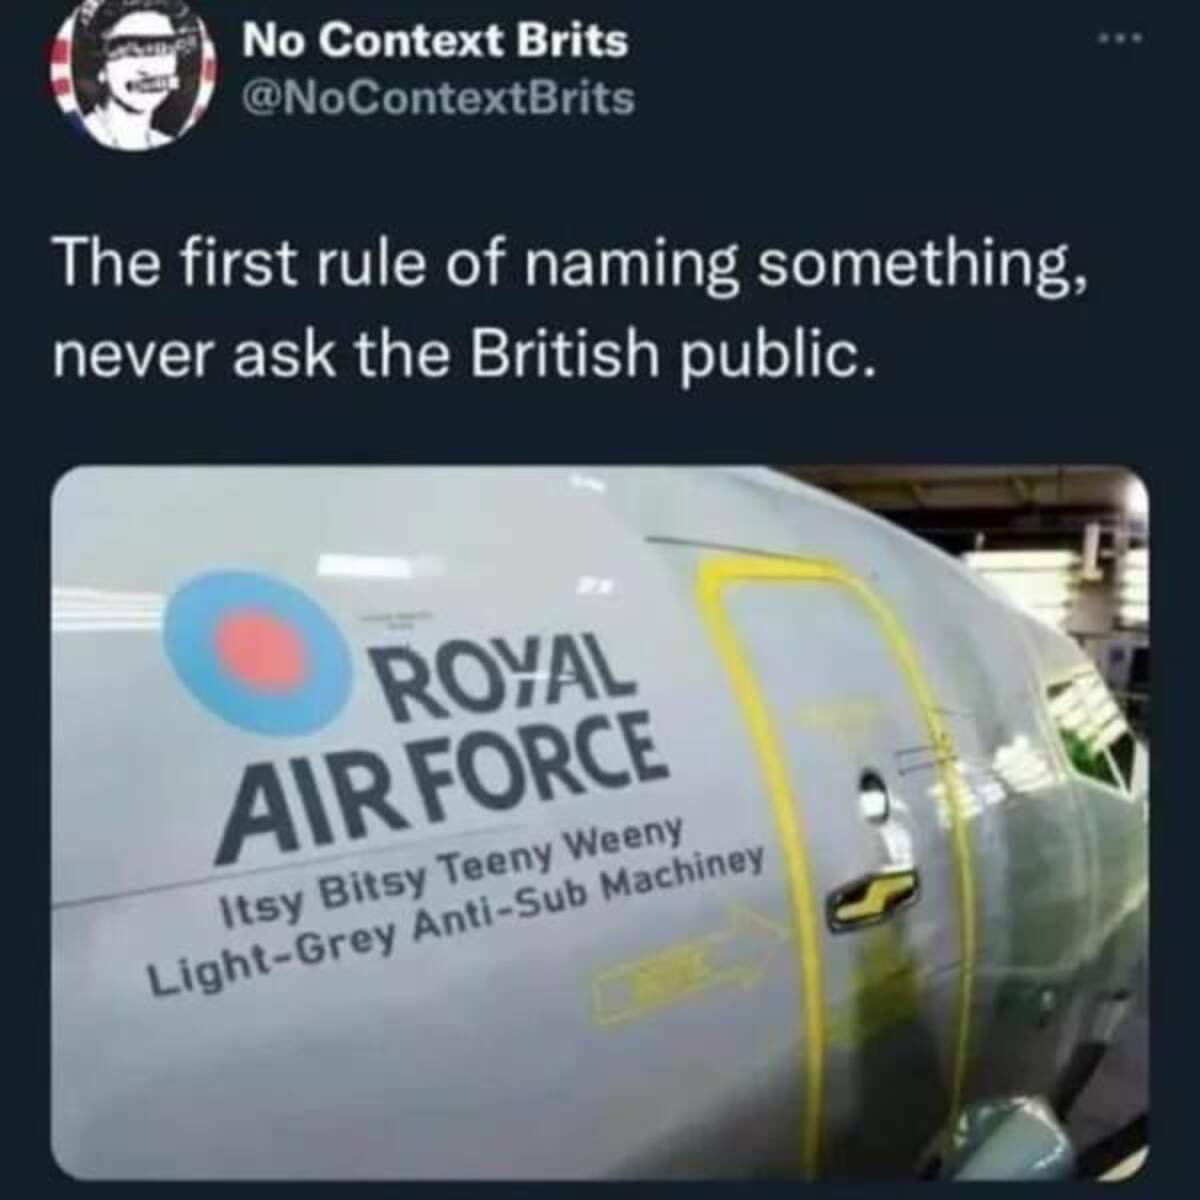 screenshot - No Context Brits The first rule of naming something, never ask the British public. Royal Air Force Itsy Bitsy Teeny Weeny LightGrey AntiSub Machiney